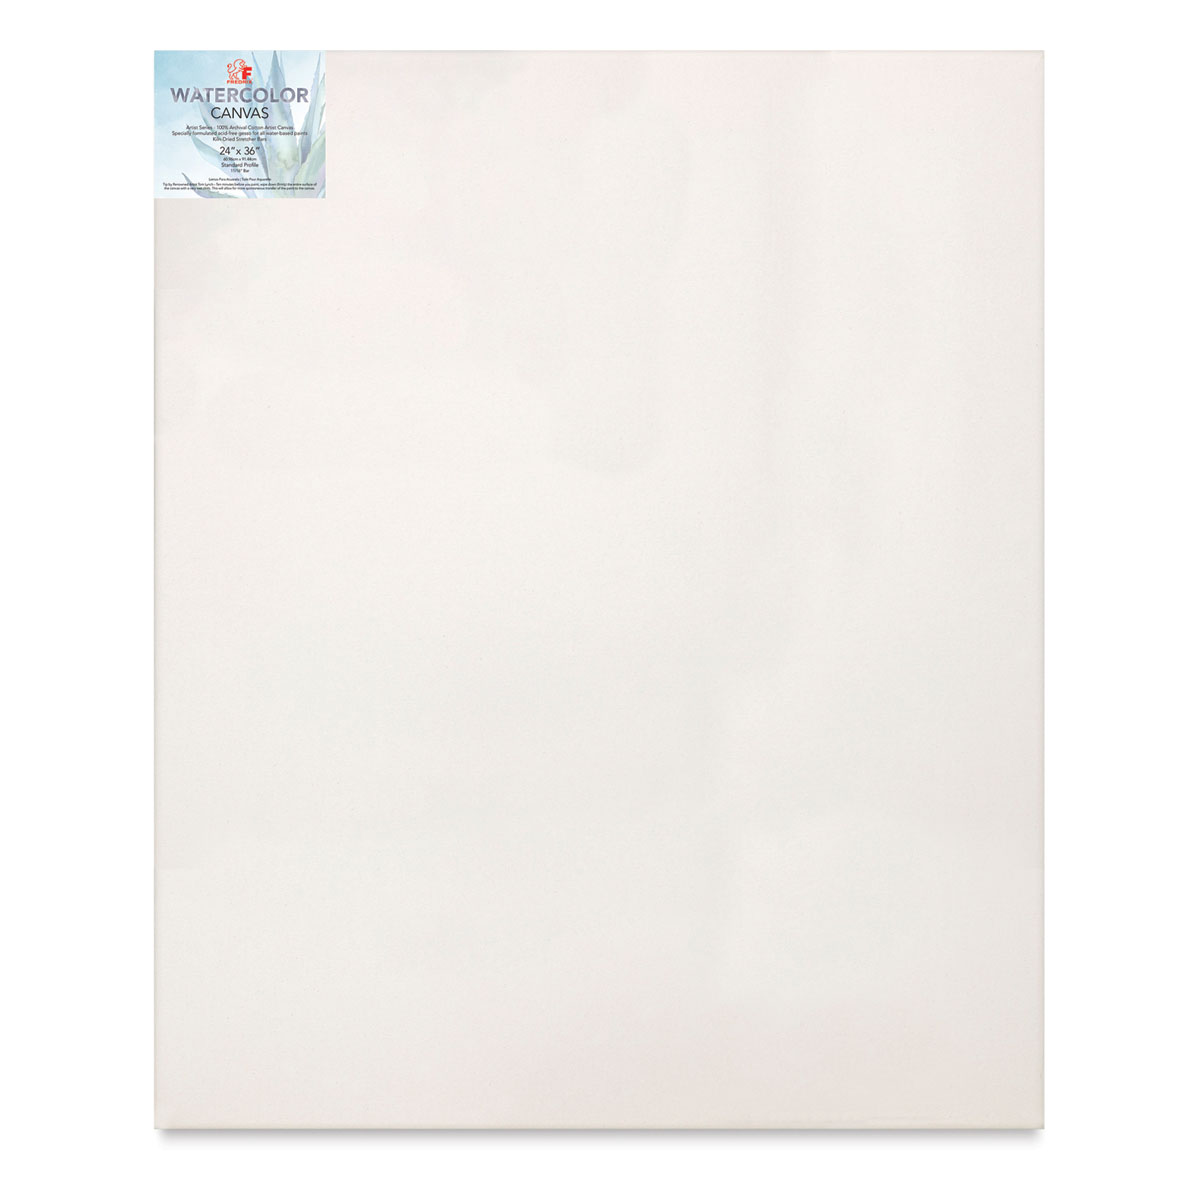 PHOENIX Linen Stretched Canvas for Painting - 11x14 Inch / 6 Pack - 13 Oz  Primed 3/4 Inch Profile of Artists Professional Canvas for Oil